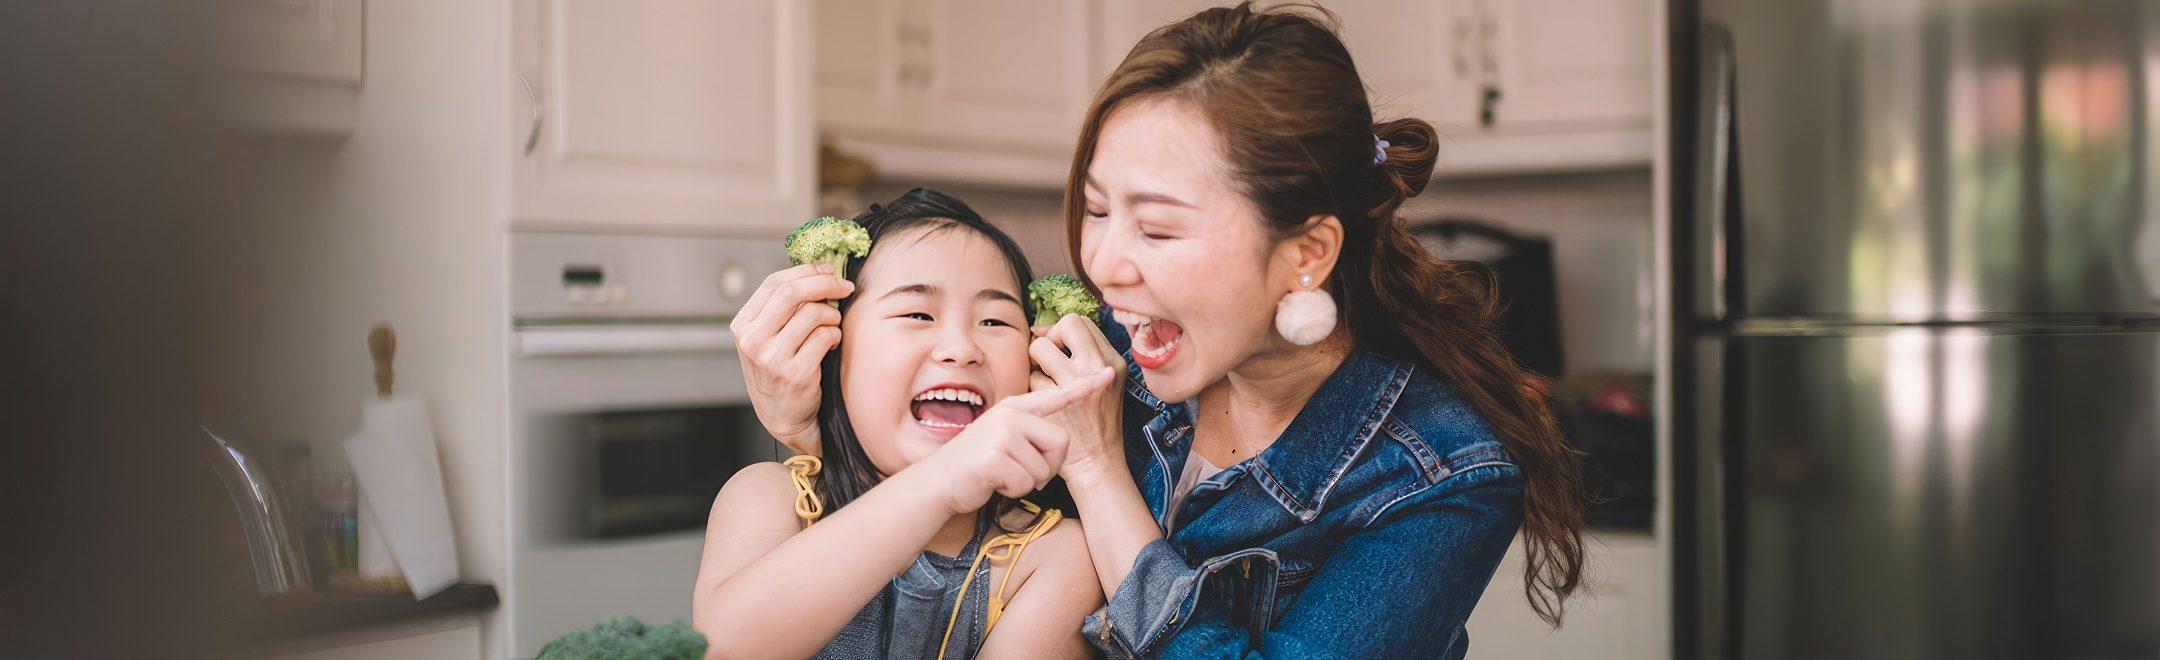 A healthy mom and daughter playing with food